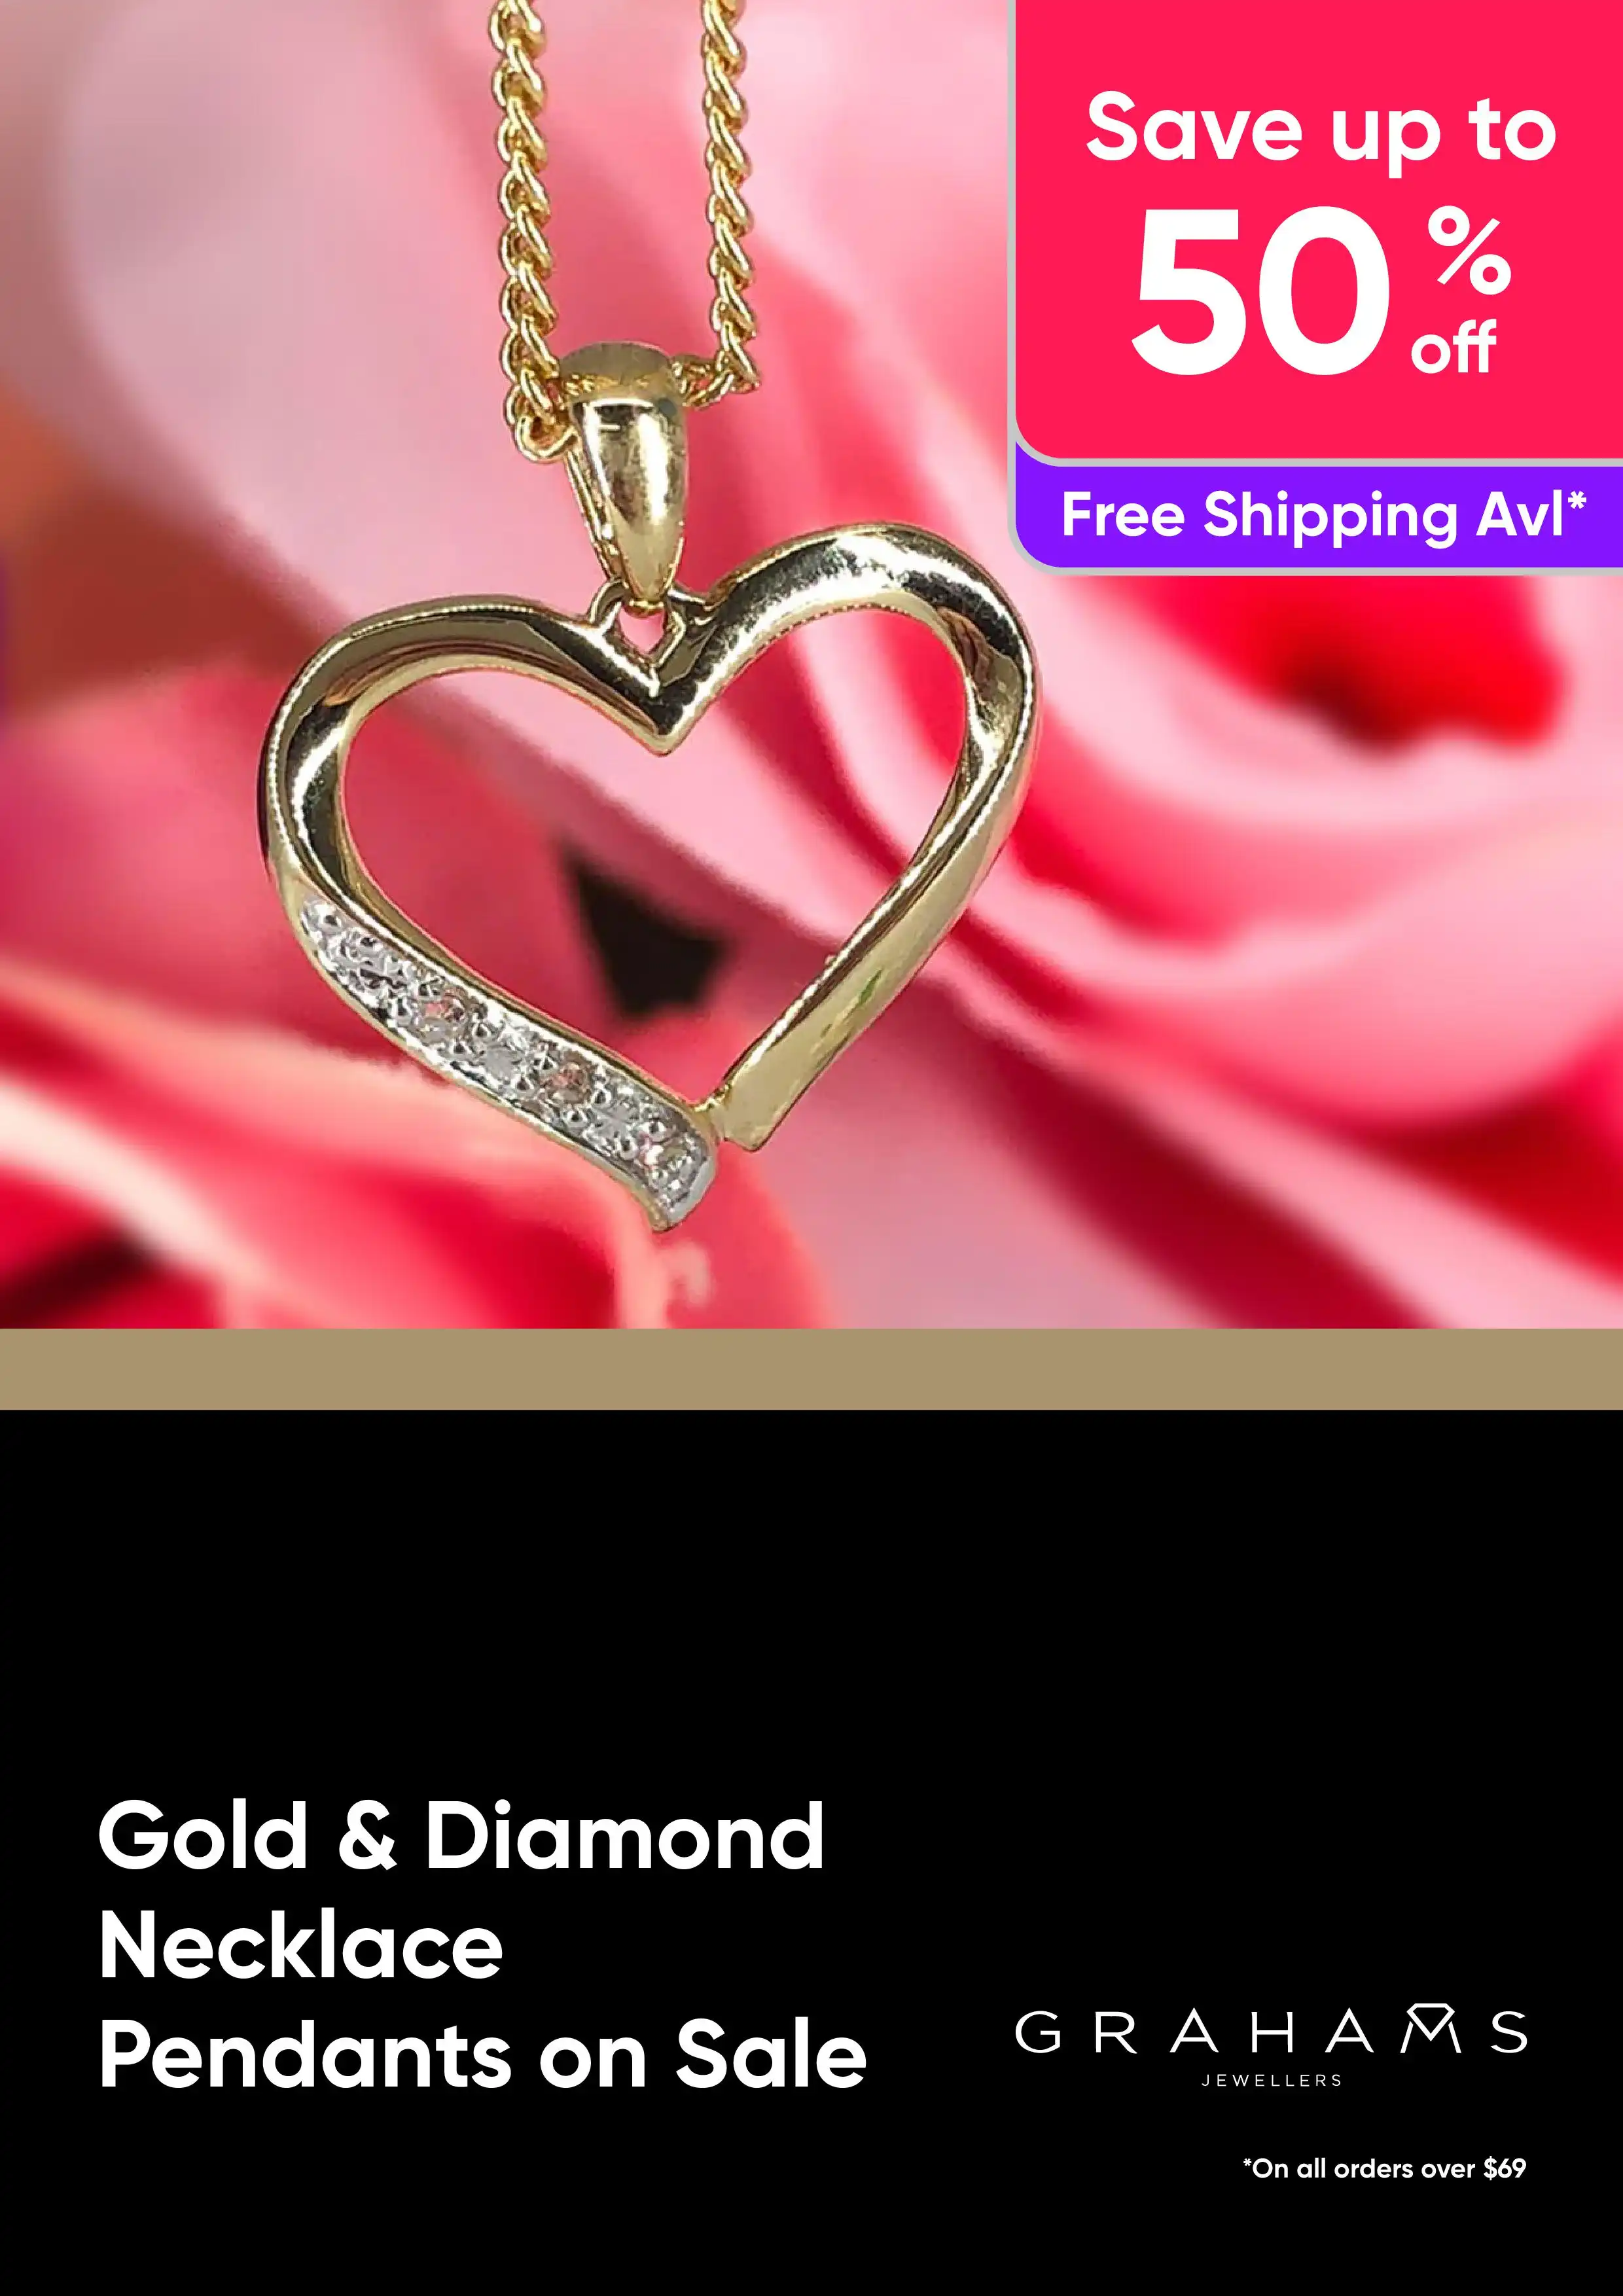 Gold and Diamond Necklace Pendants on Sale - Save Up to 50% Off